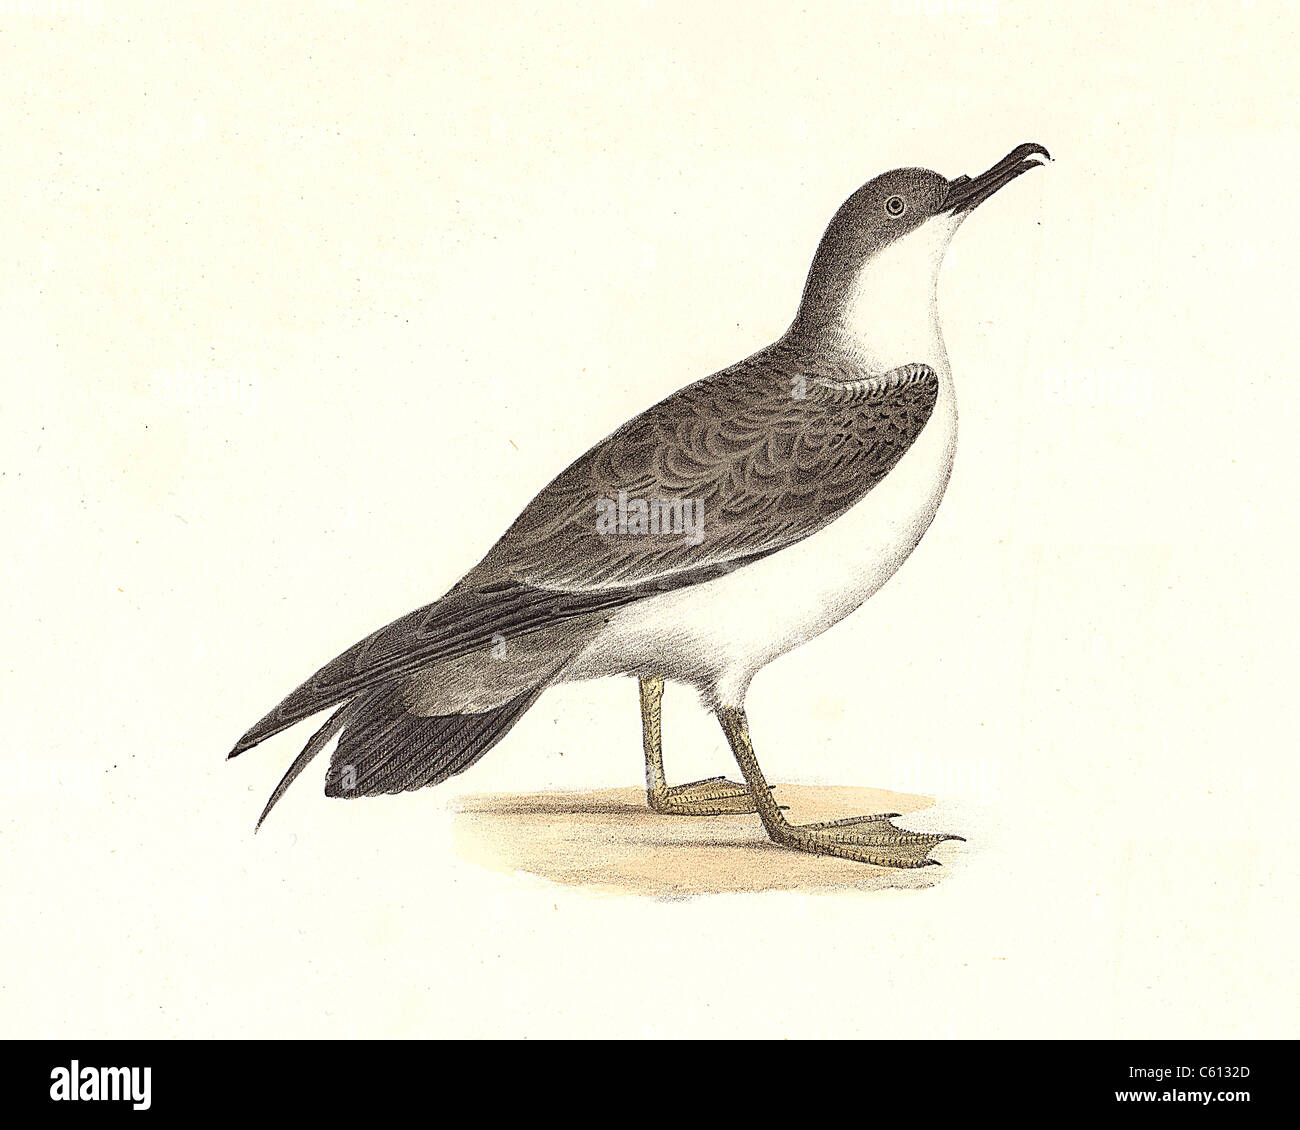 The Large Shearwater, young, Audubon's Shearwater (Puffinus obscurus, Puffinus lherminieri) vintage bird lithograph - James De Kay, NY Zoology Birds Stock Photo